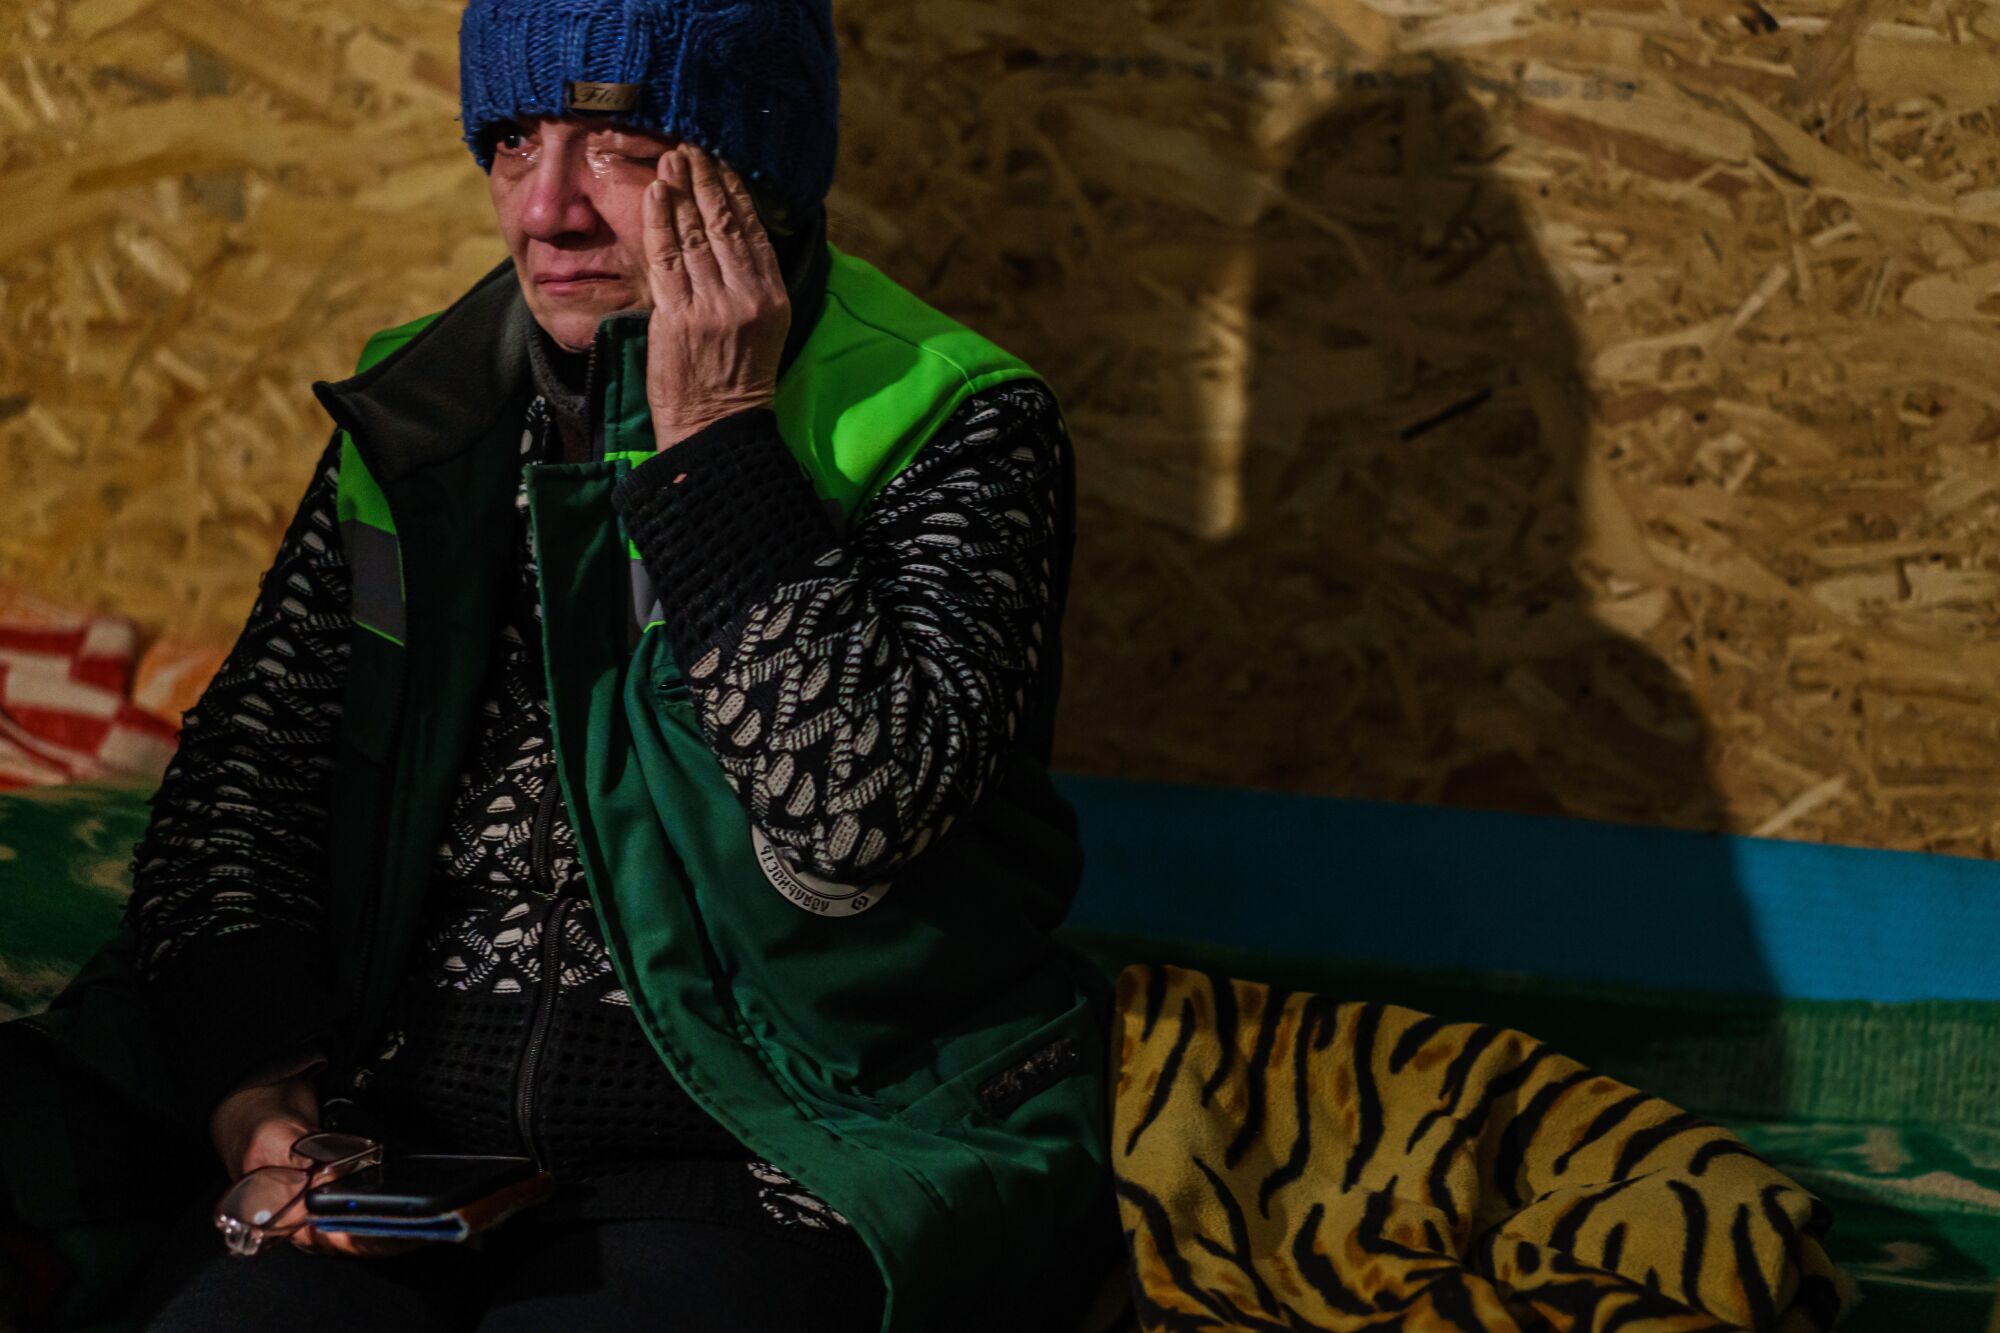 A woman wearing a blue beanie and green vest cries while seated inside a dimly lit room in a shelter.